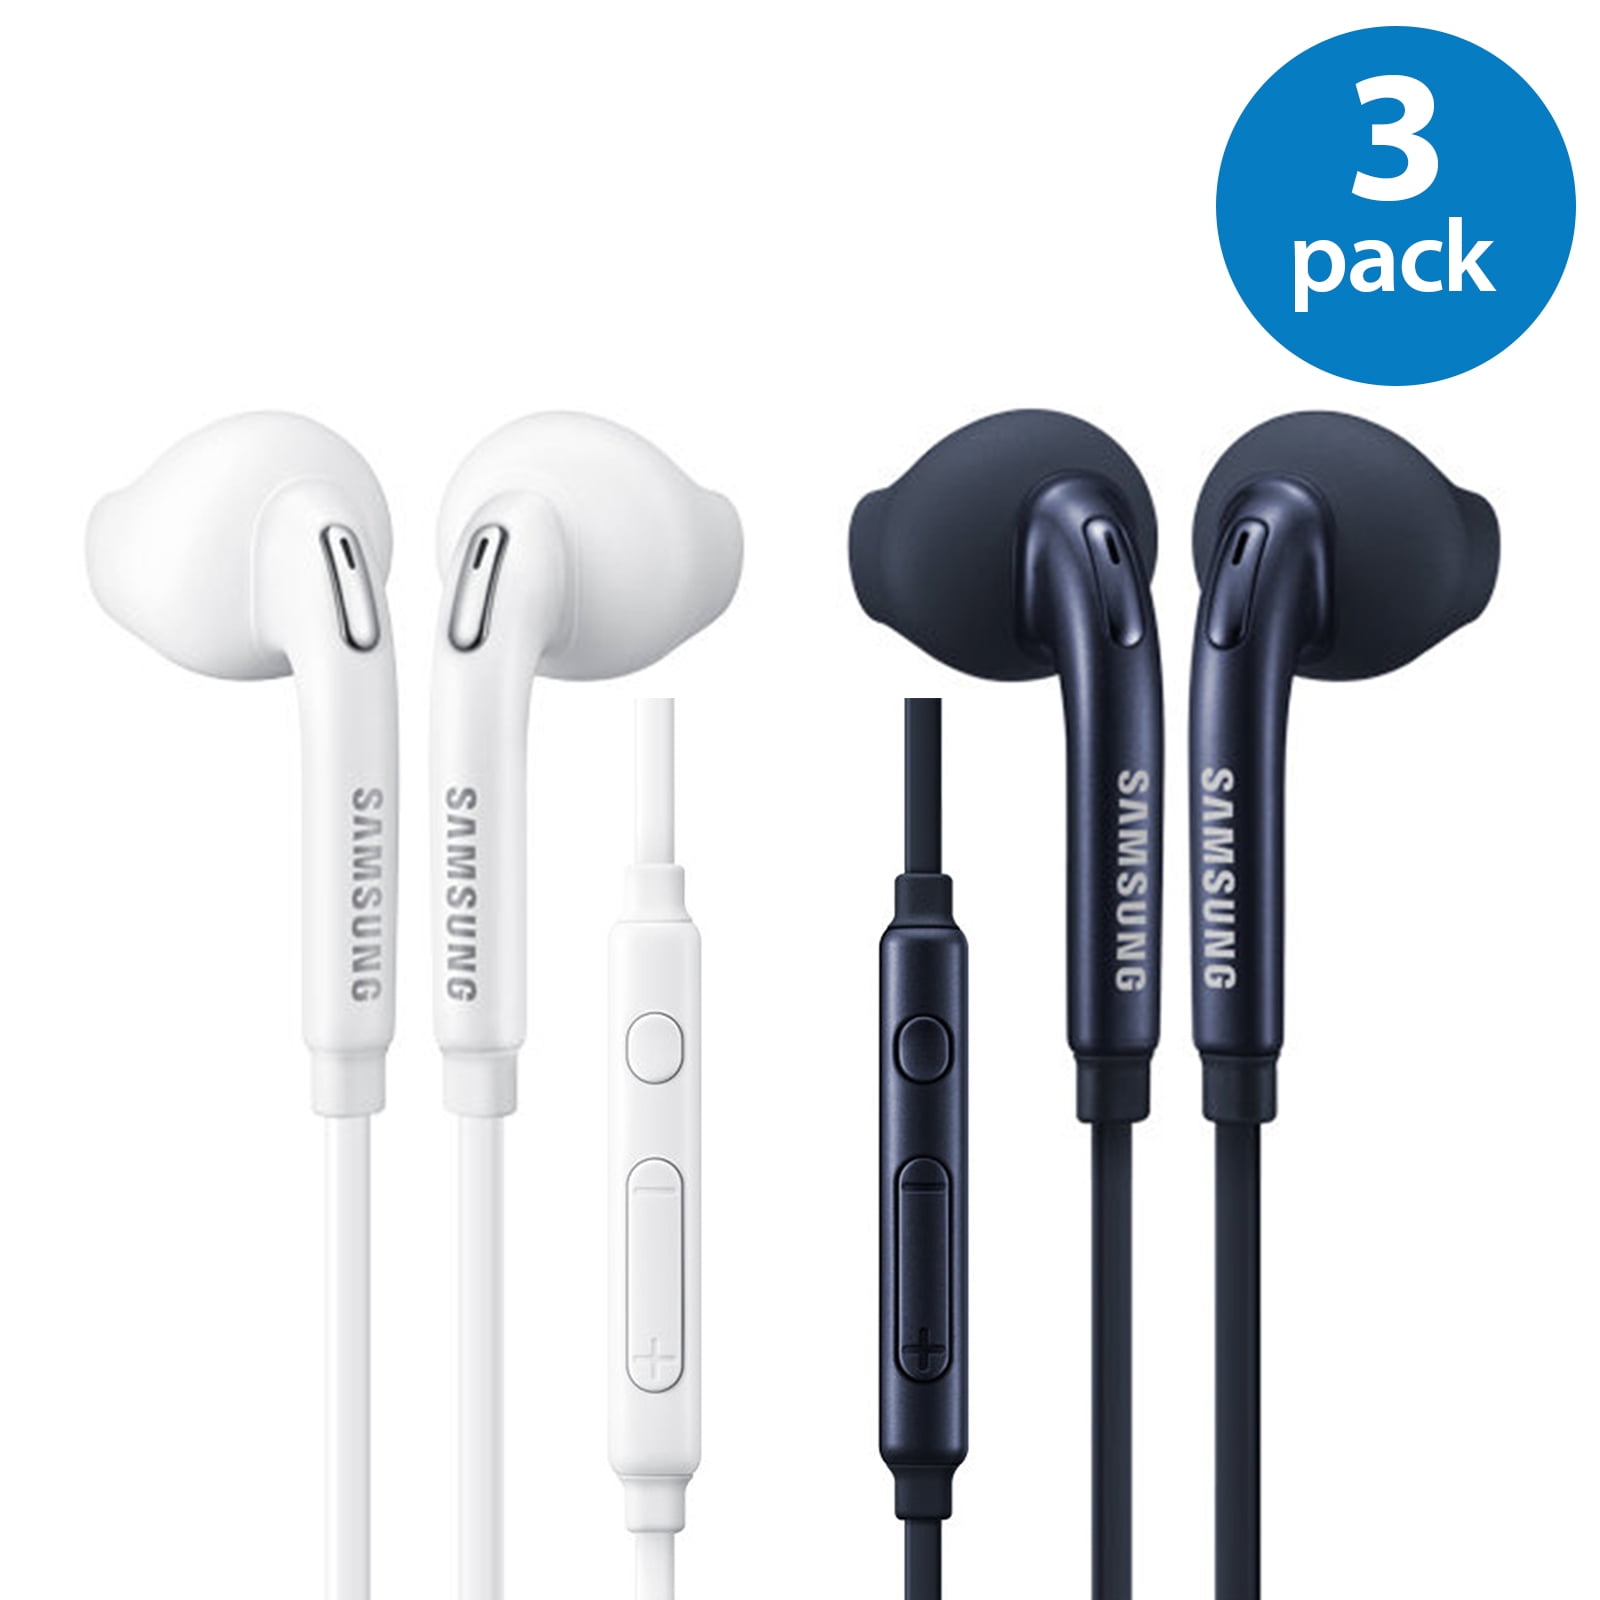 Plus Genuine Samsung In-Ear Headphones Handsfree With Mic For Galaxy S6 S7 Edge 